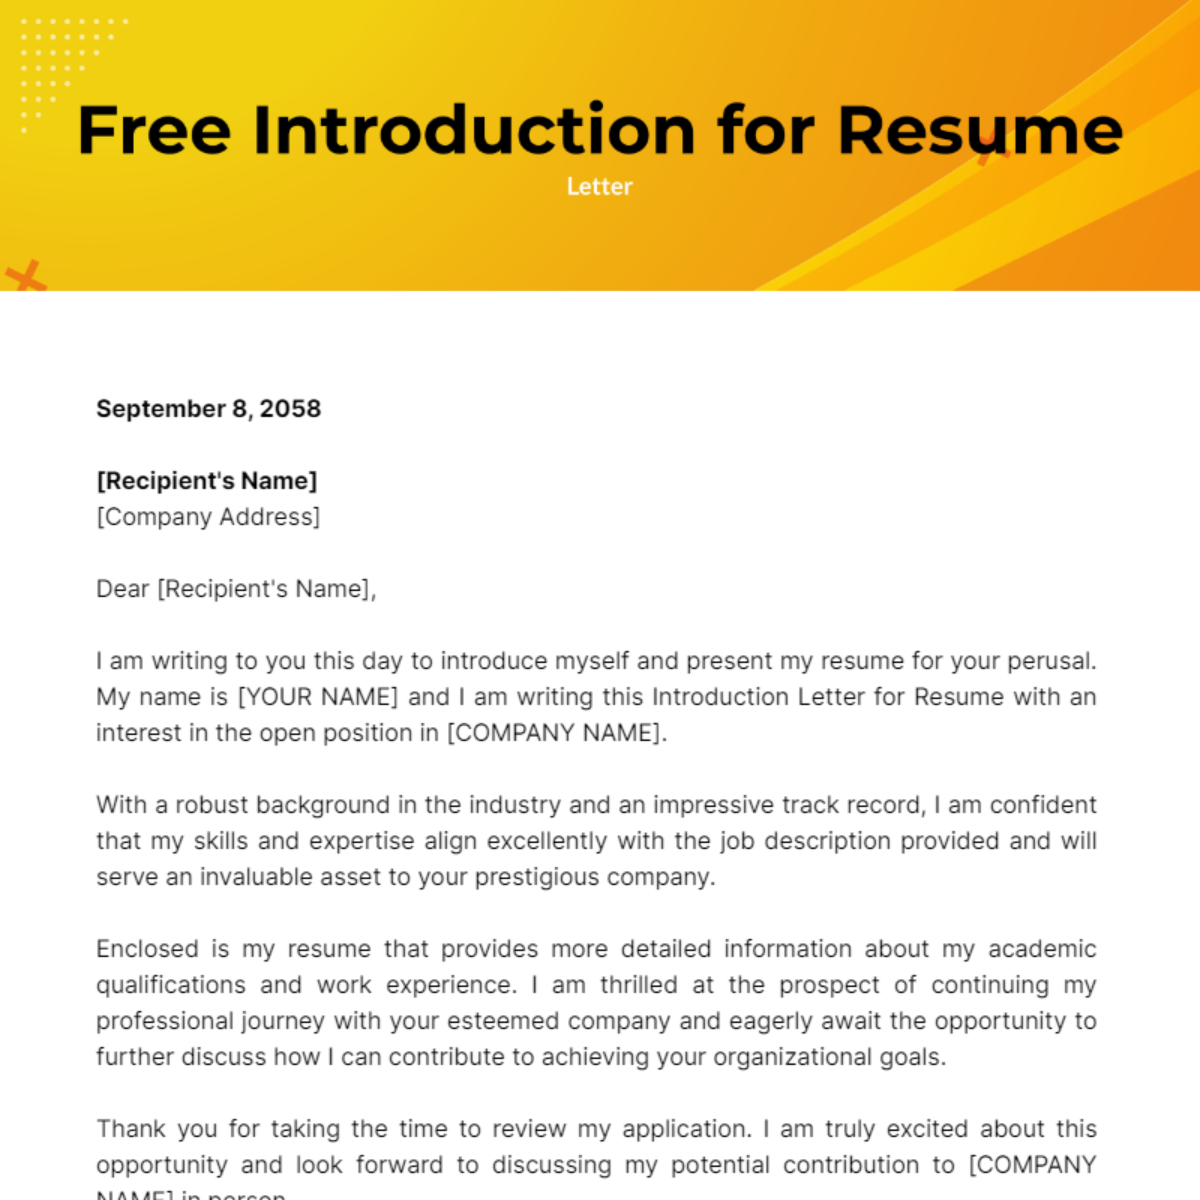 Introduction Letter for Resume Template